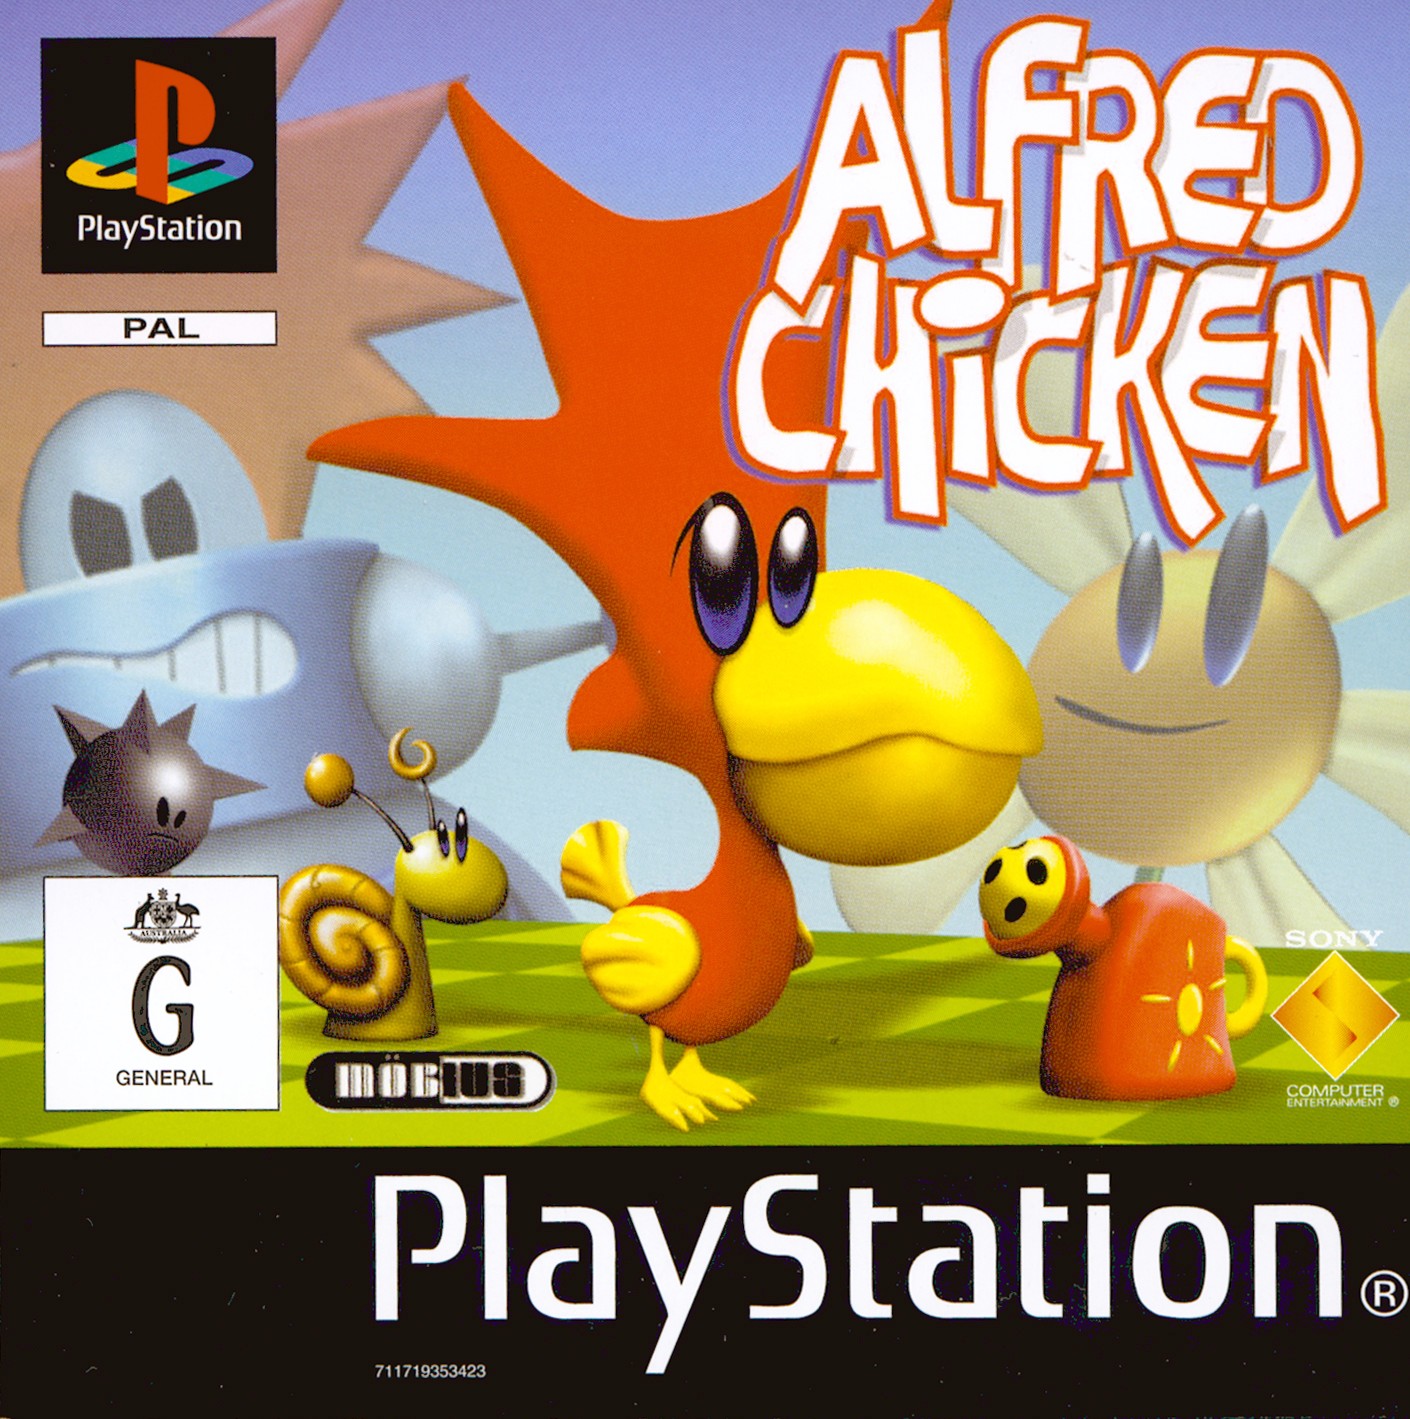 Alfred Chicken PSX cover